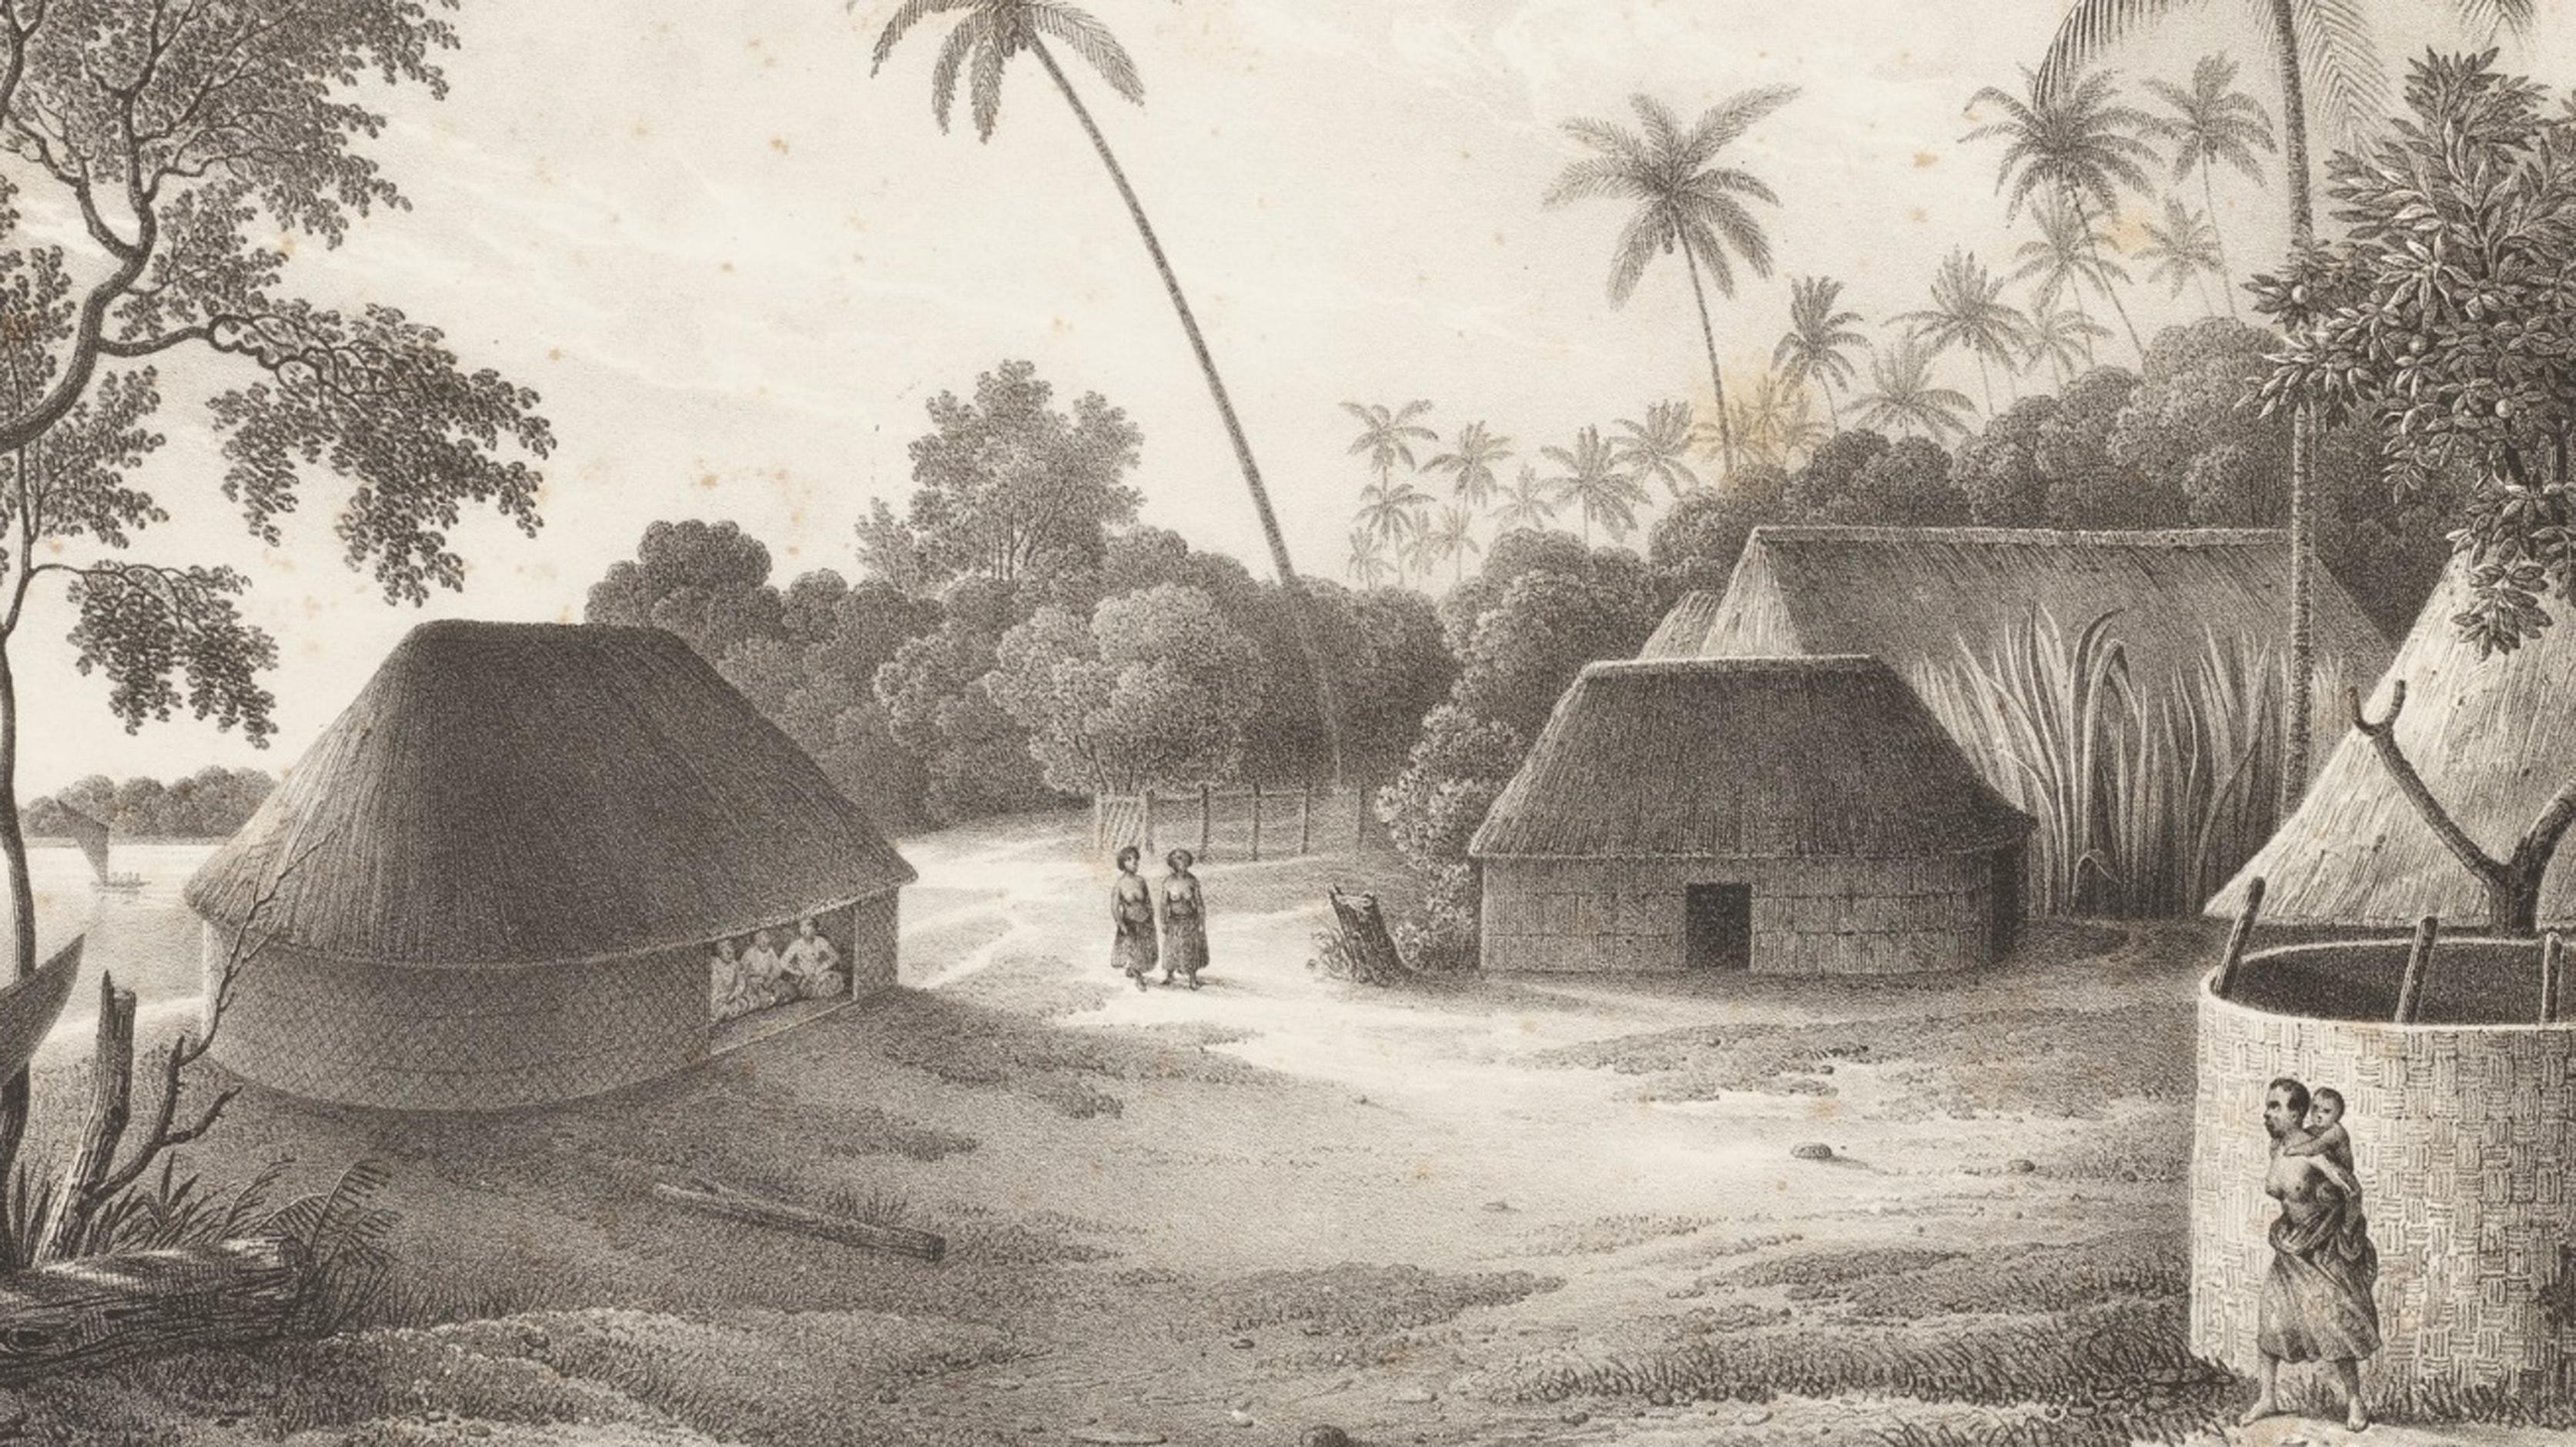 An engraving by Louie-Auguste de Sainson depicting a residential dwelling (left) constructed on top of a mound approximately one metre tall. Image from the collections of the State Library of New South Wales.